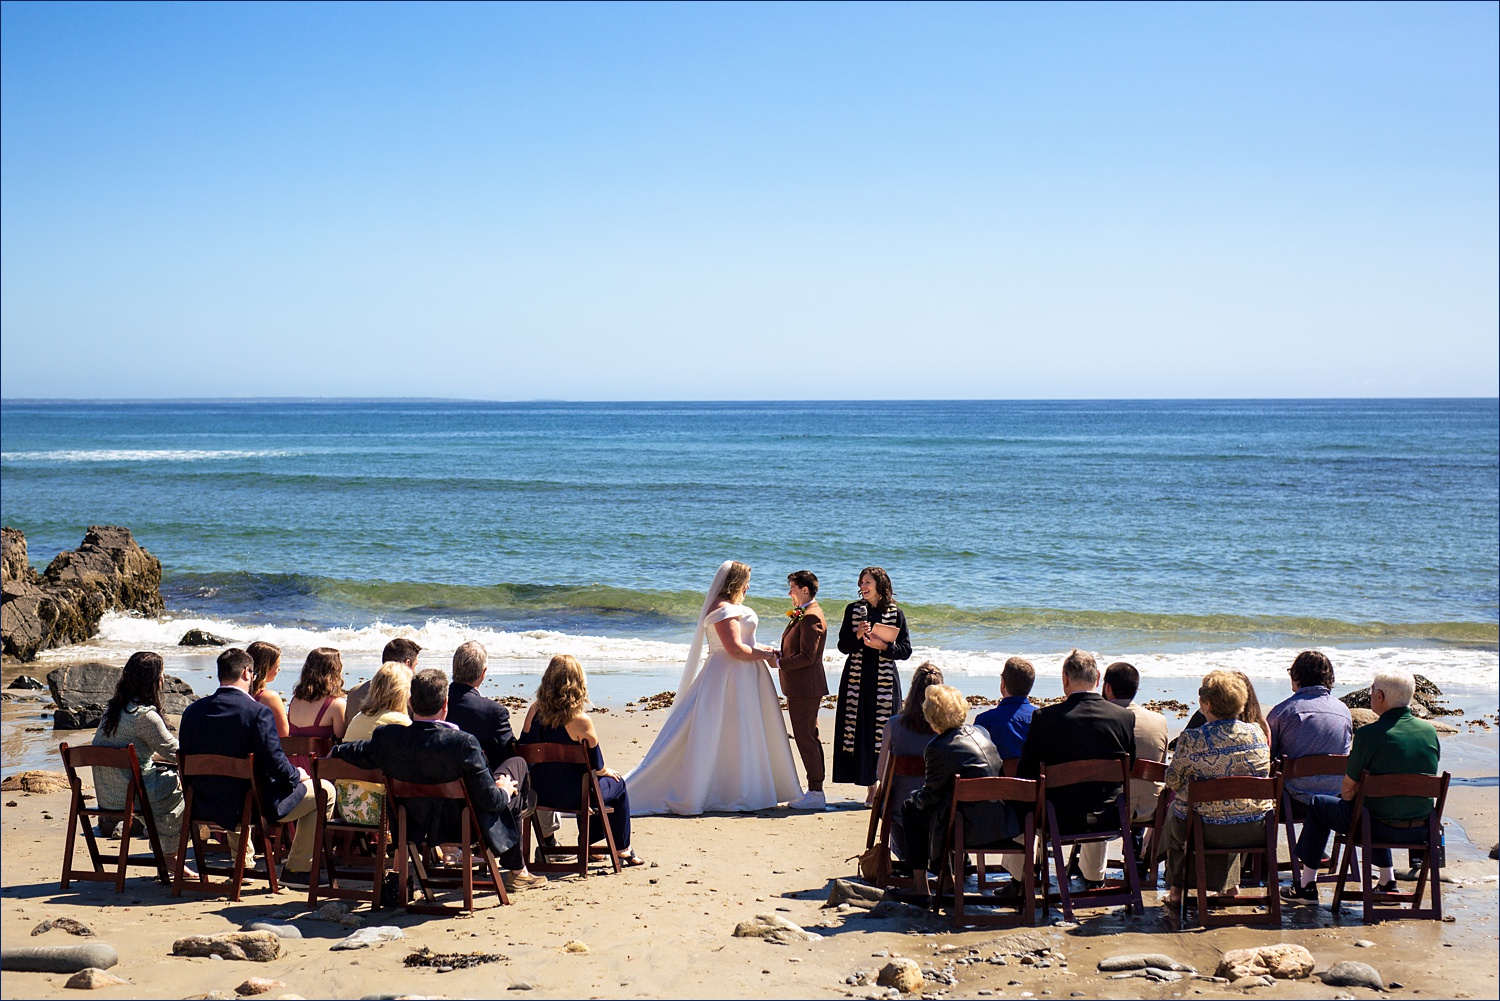 The family and friends watch the brides get married on the beach of Marginal Way Maine